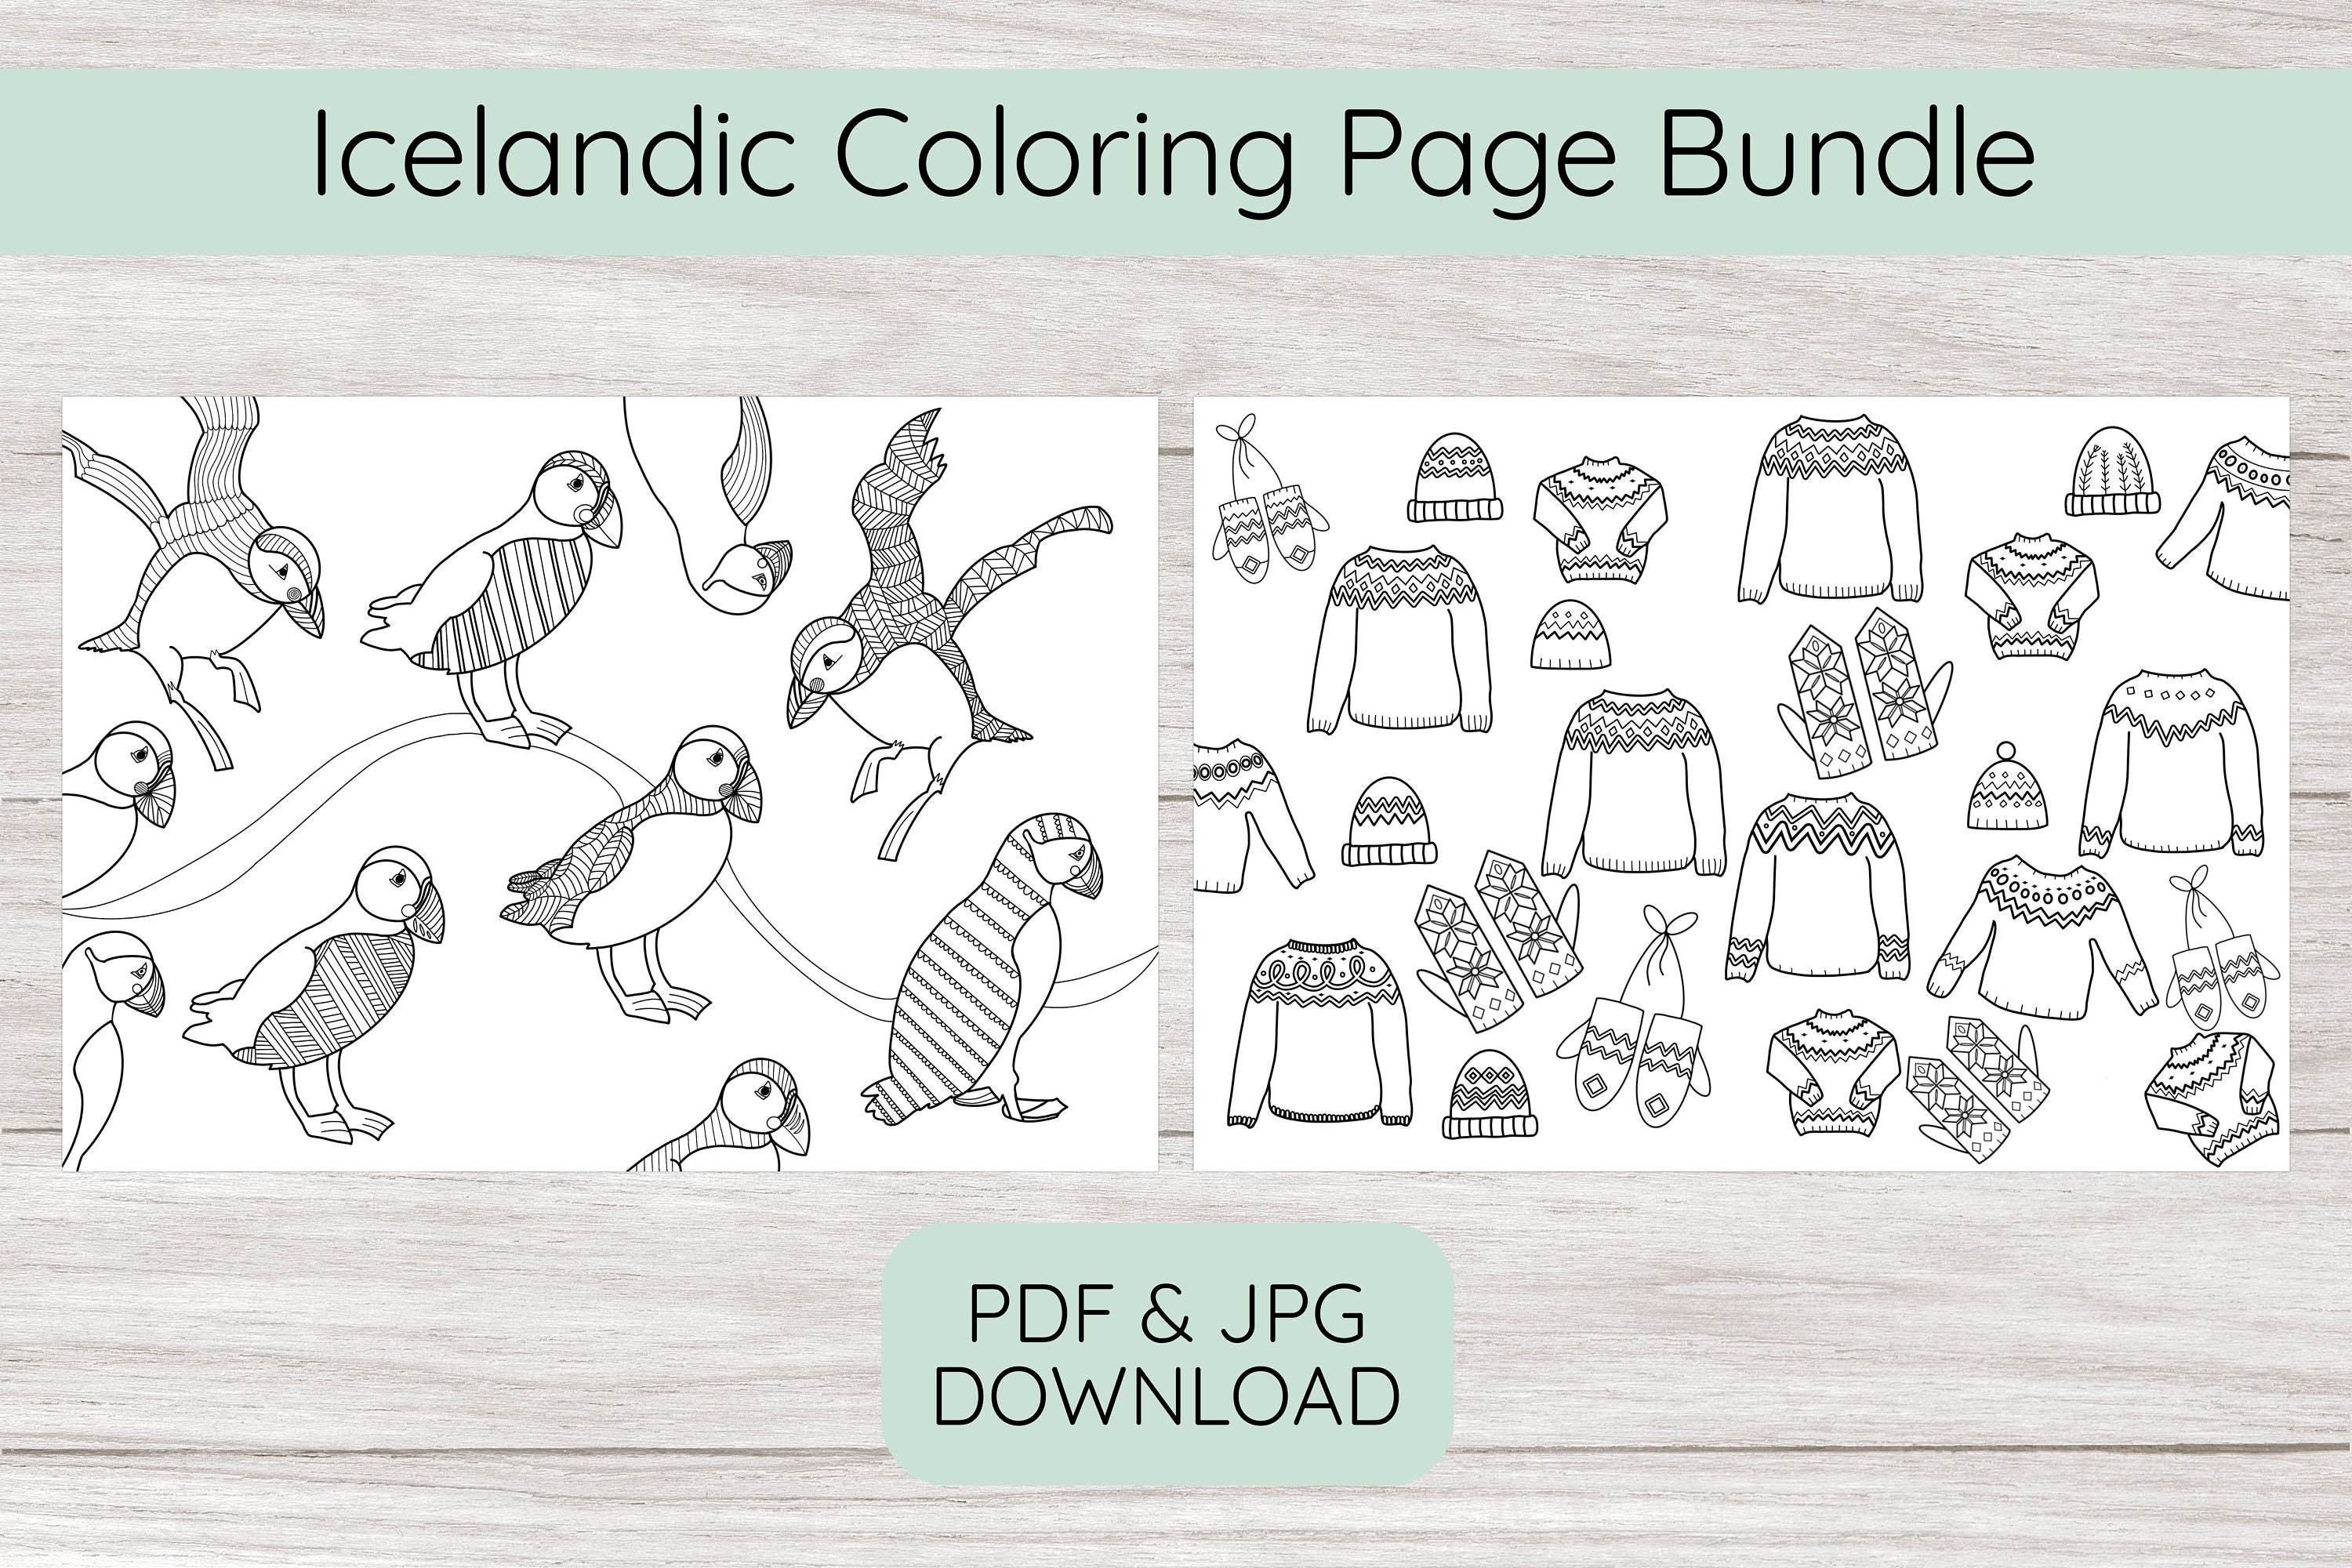 Iceland coloring page bundle set of coloring sheet puffin lopapeysa drawing doodle art iceland gift idea printable instant download